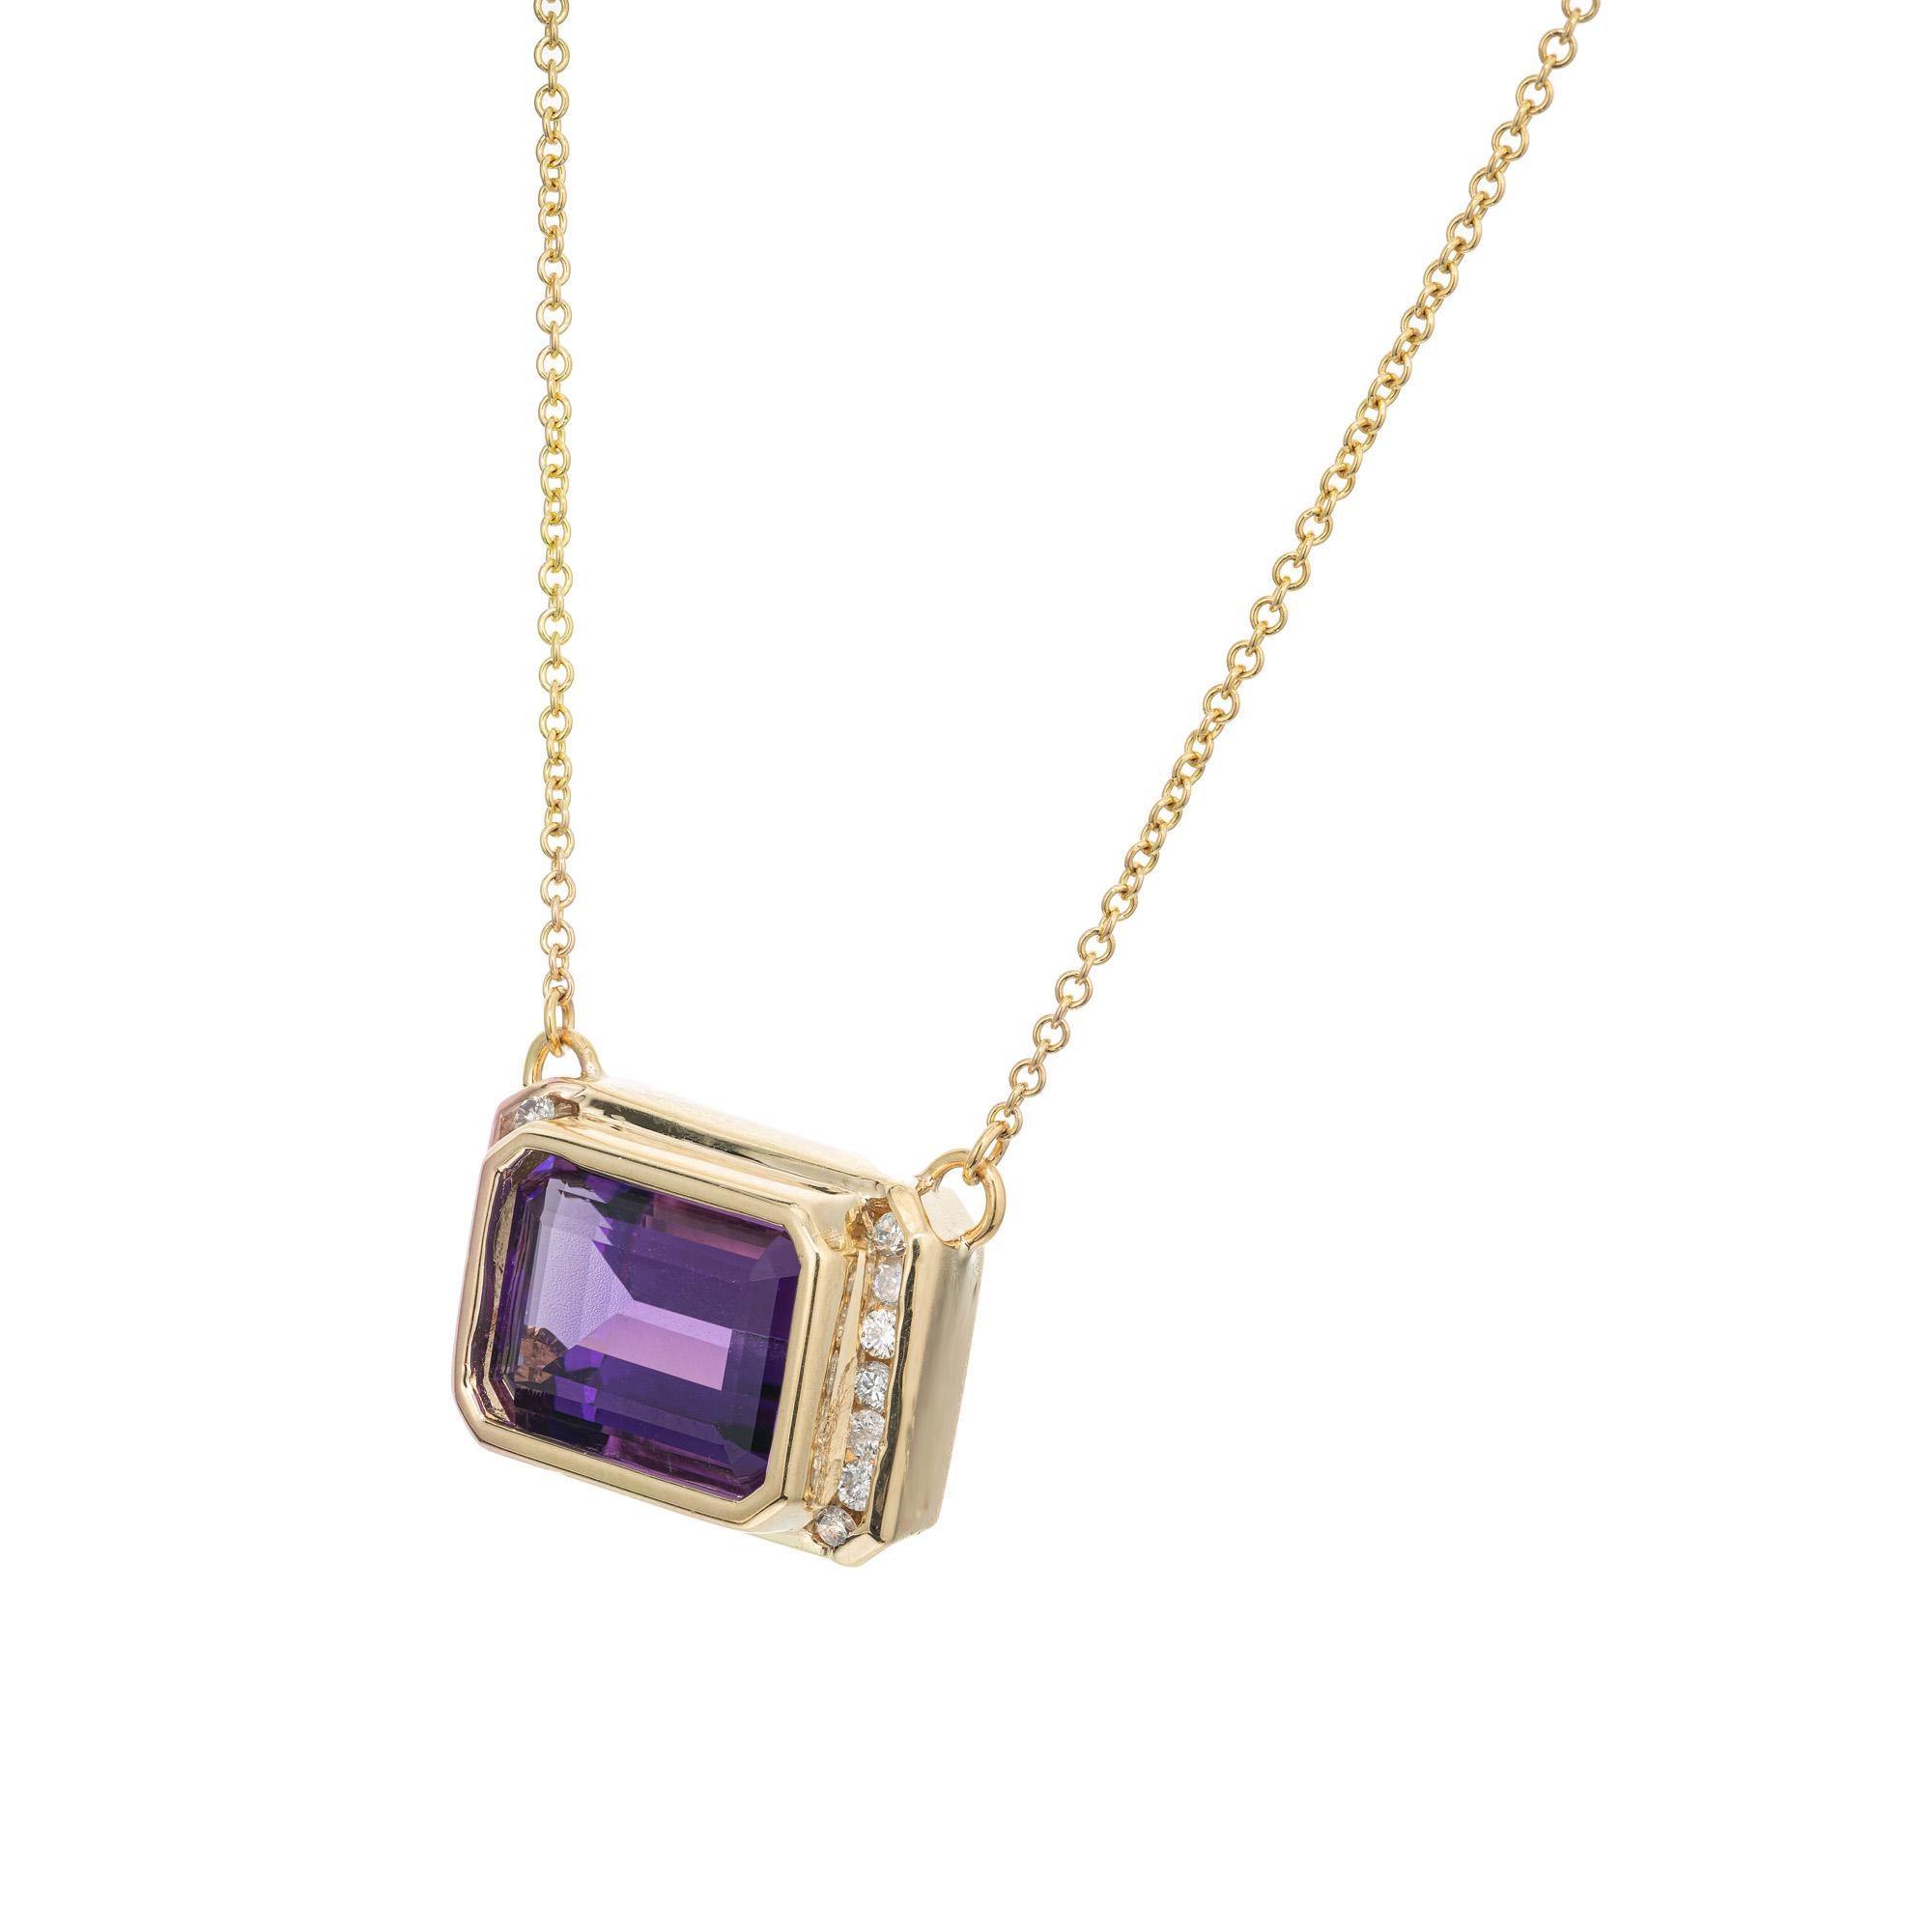 6.56 Carat Rectangular Amethyst Diamond Yellow Gold Pendant Necklace  In Good Condition For Sale In Stamford, CT